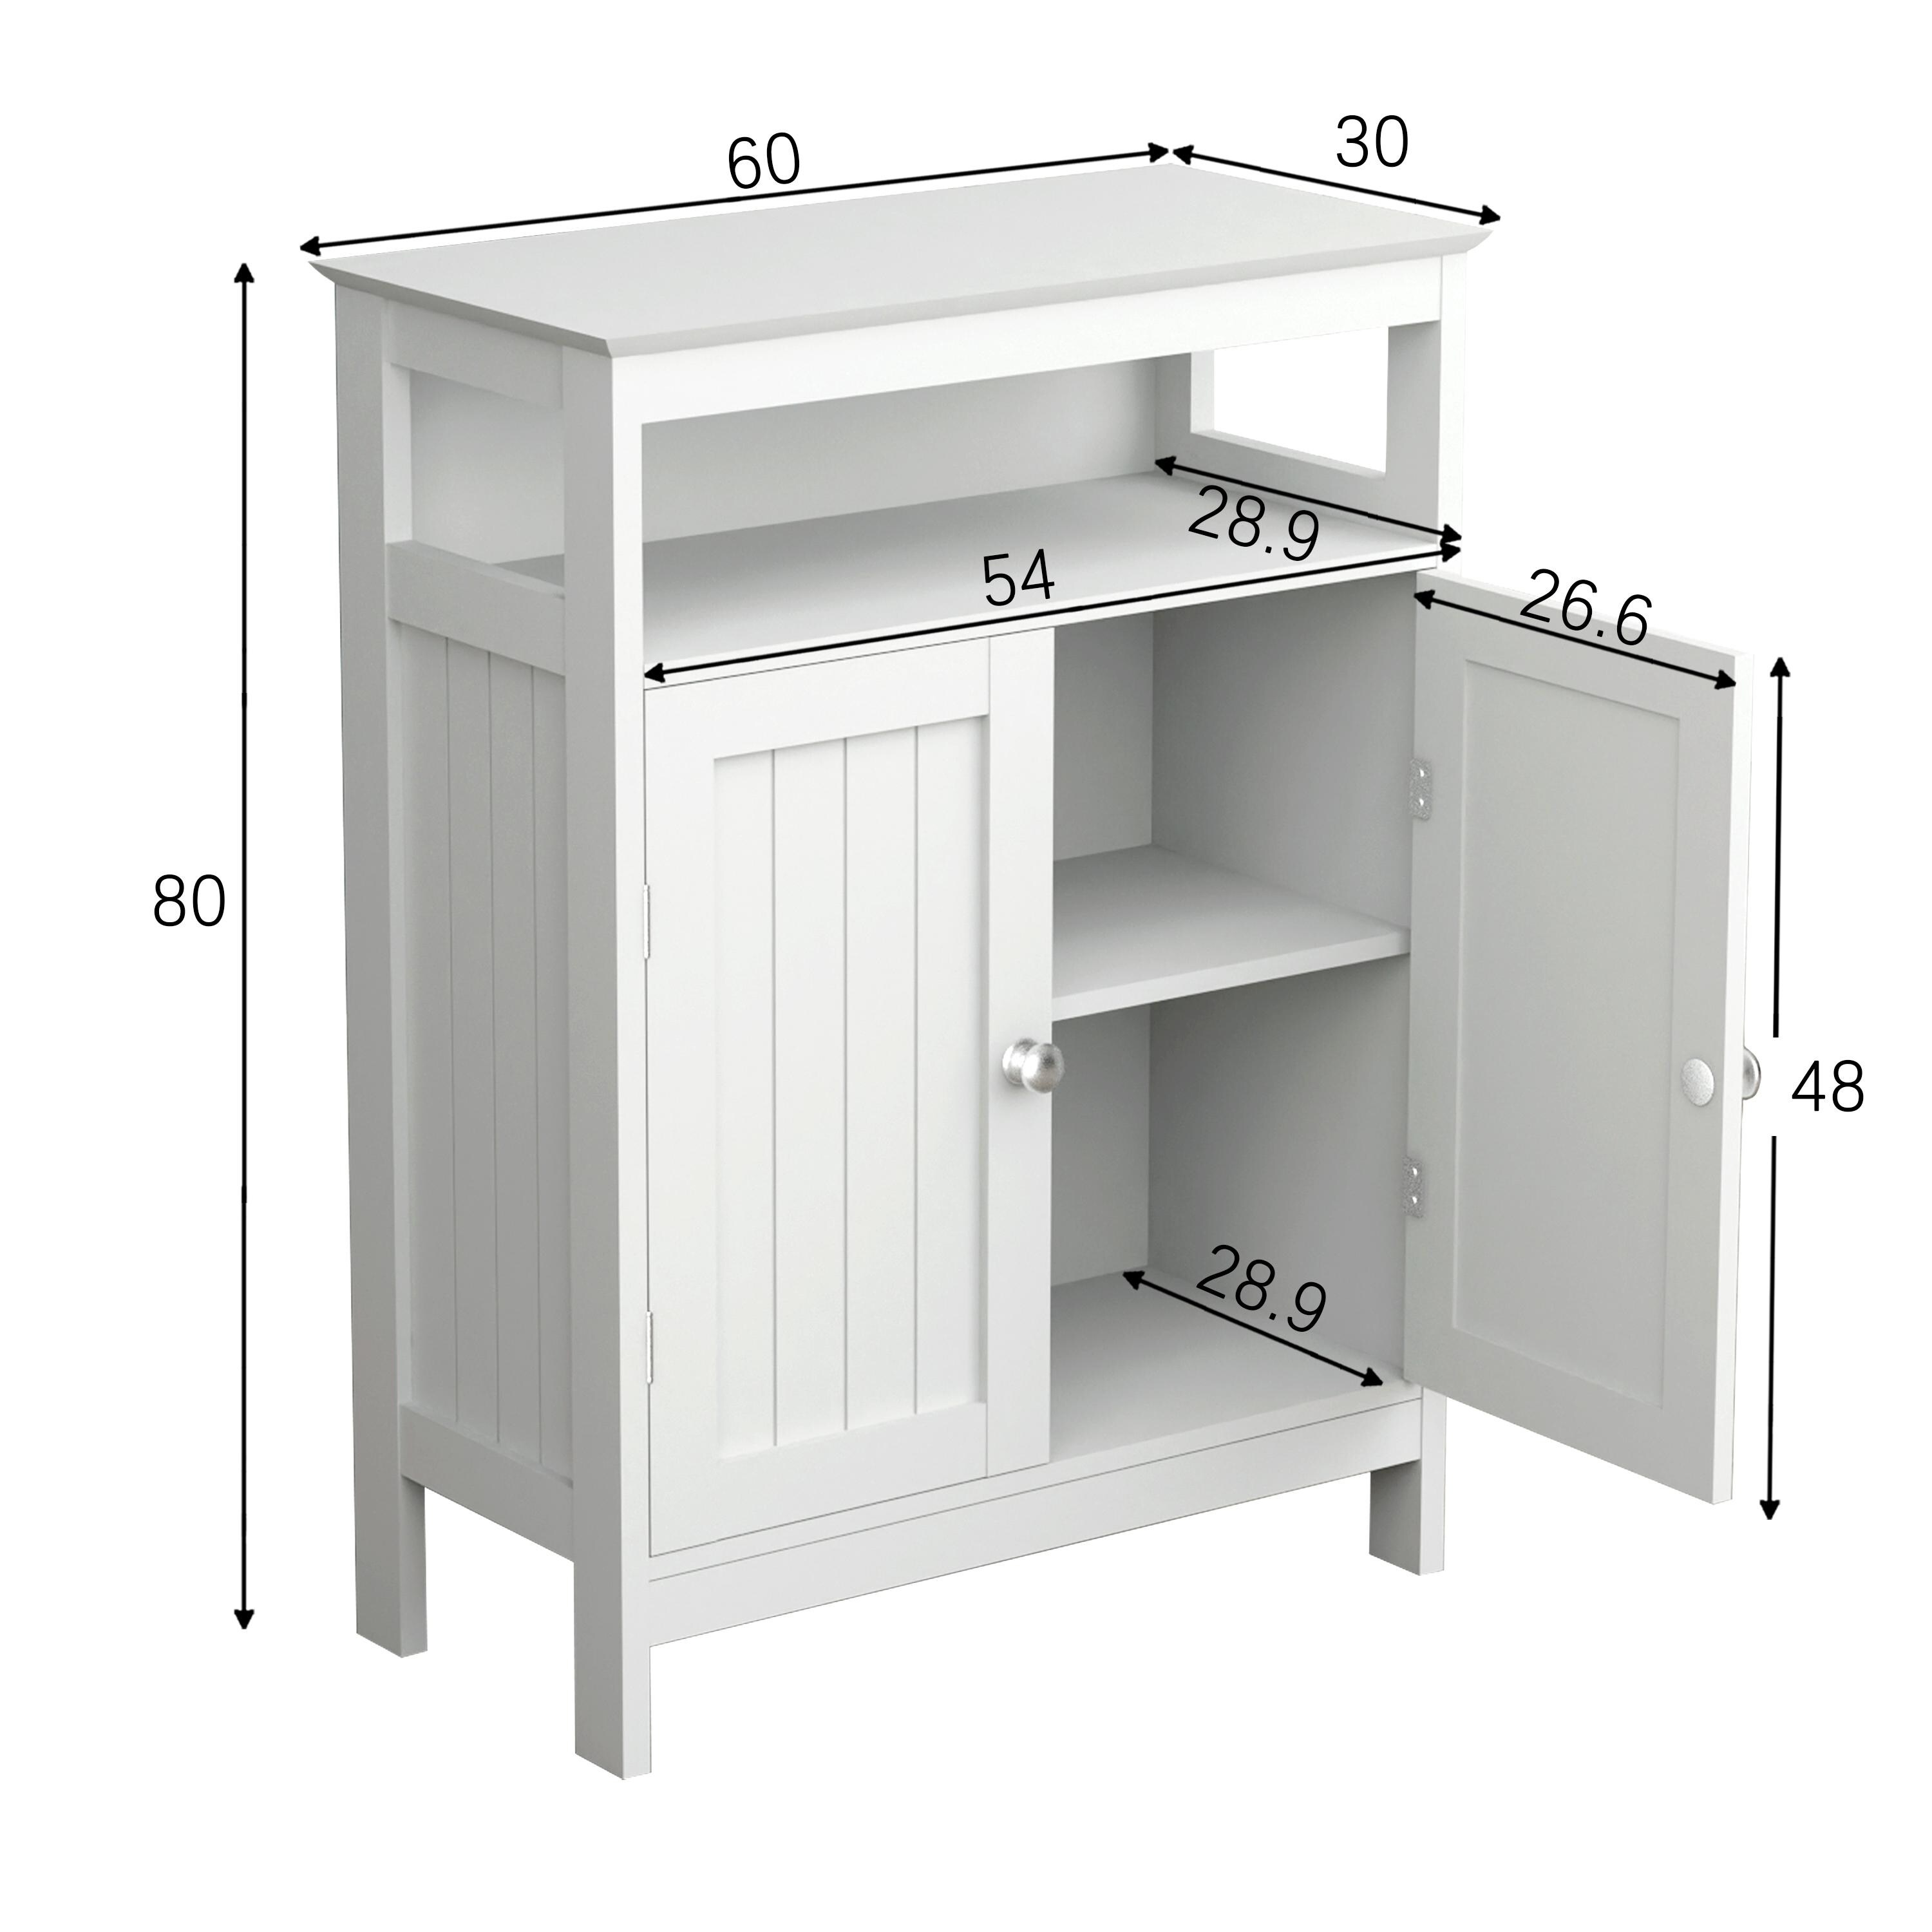 https://ak1.ostkcdn.com/images/products/is/images/direct/d3748faef560c2029519a347e3d3bc60d35d8220/Bathroom-standing-storage-cabinet.jpg